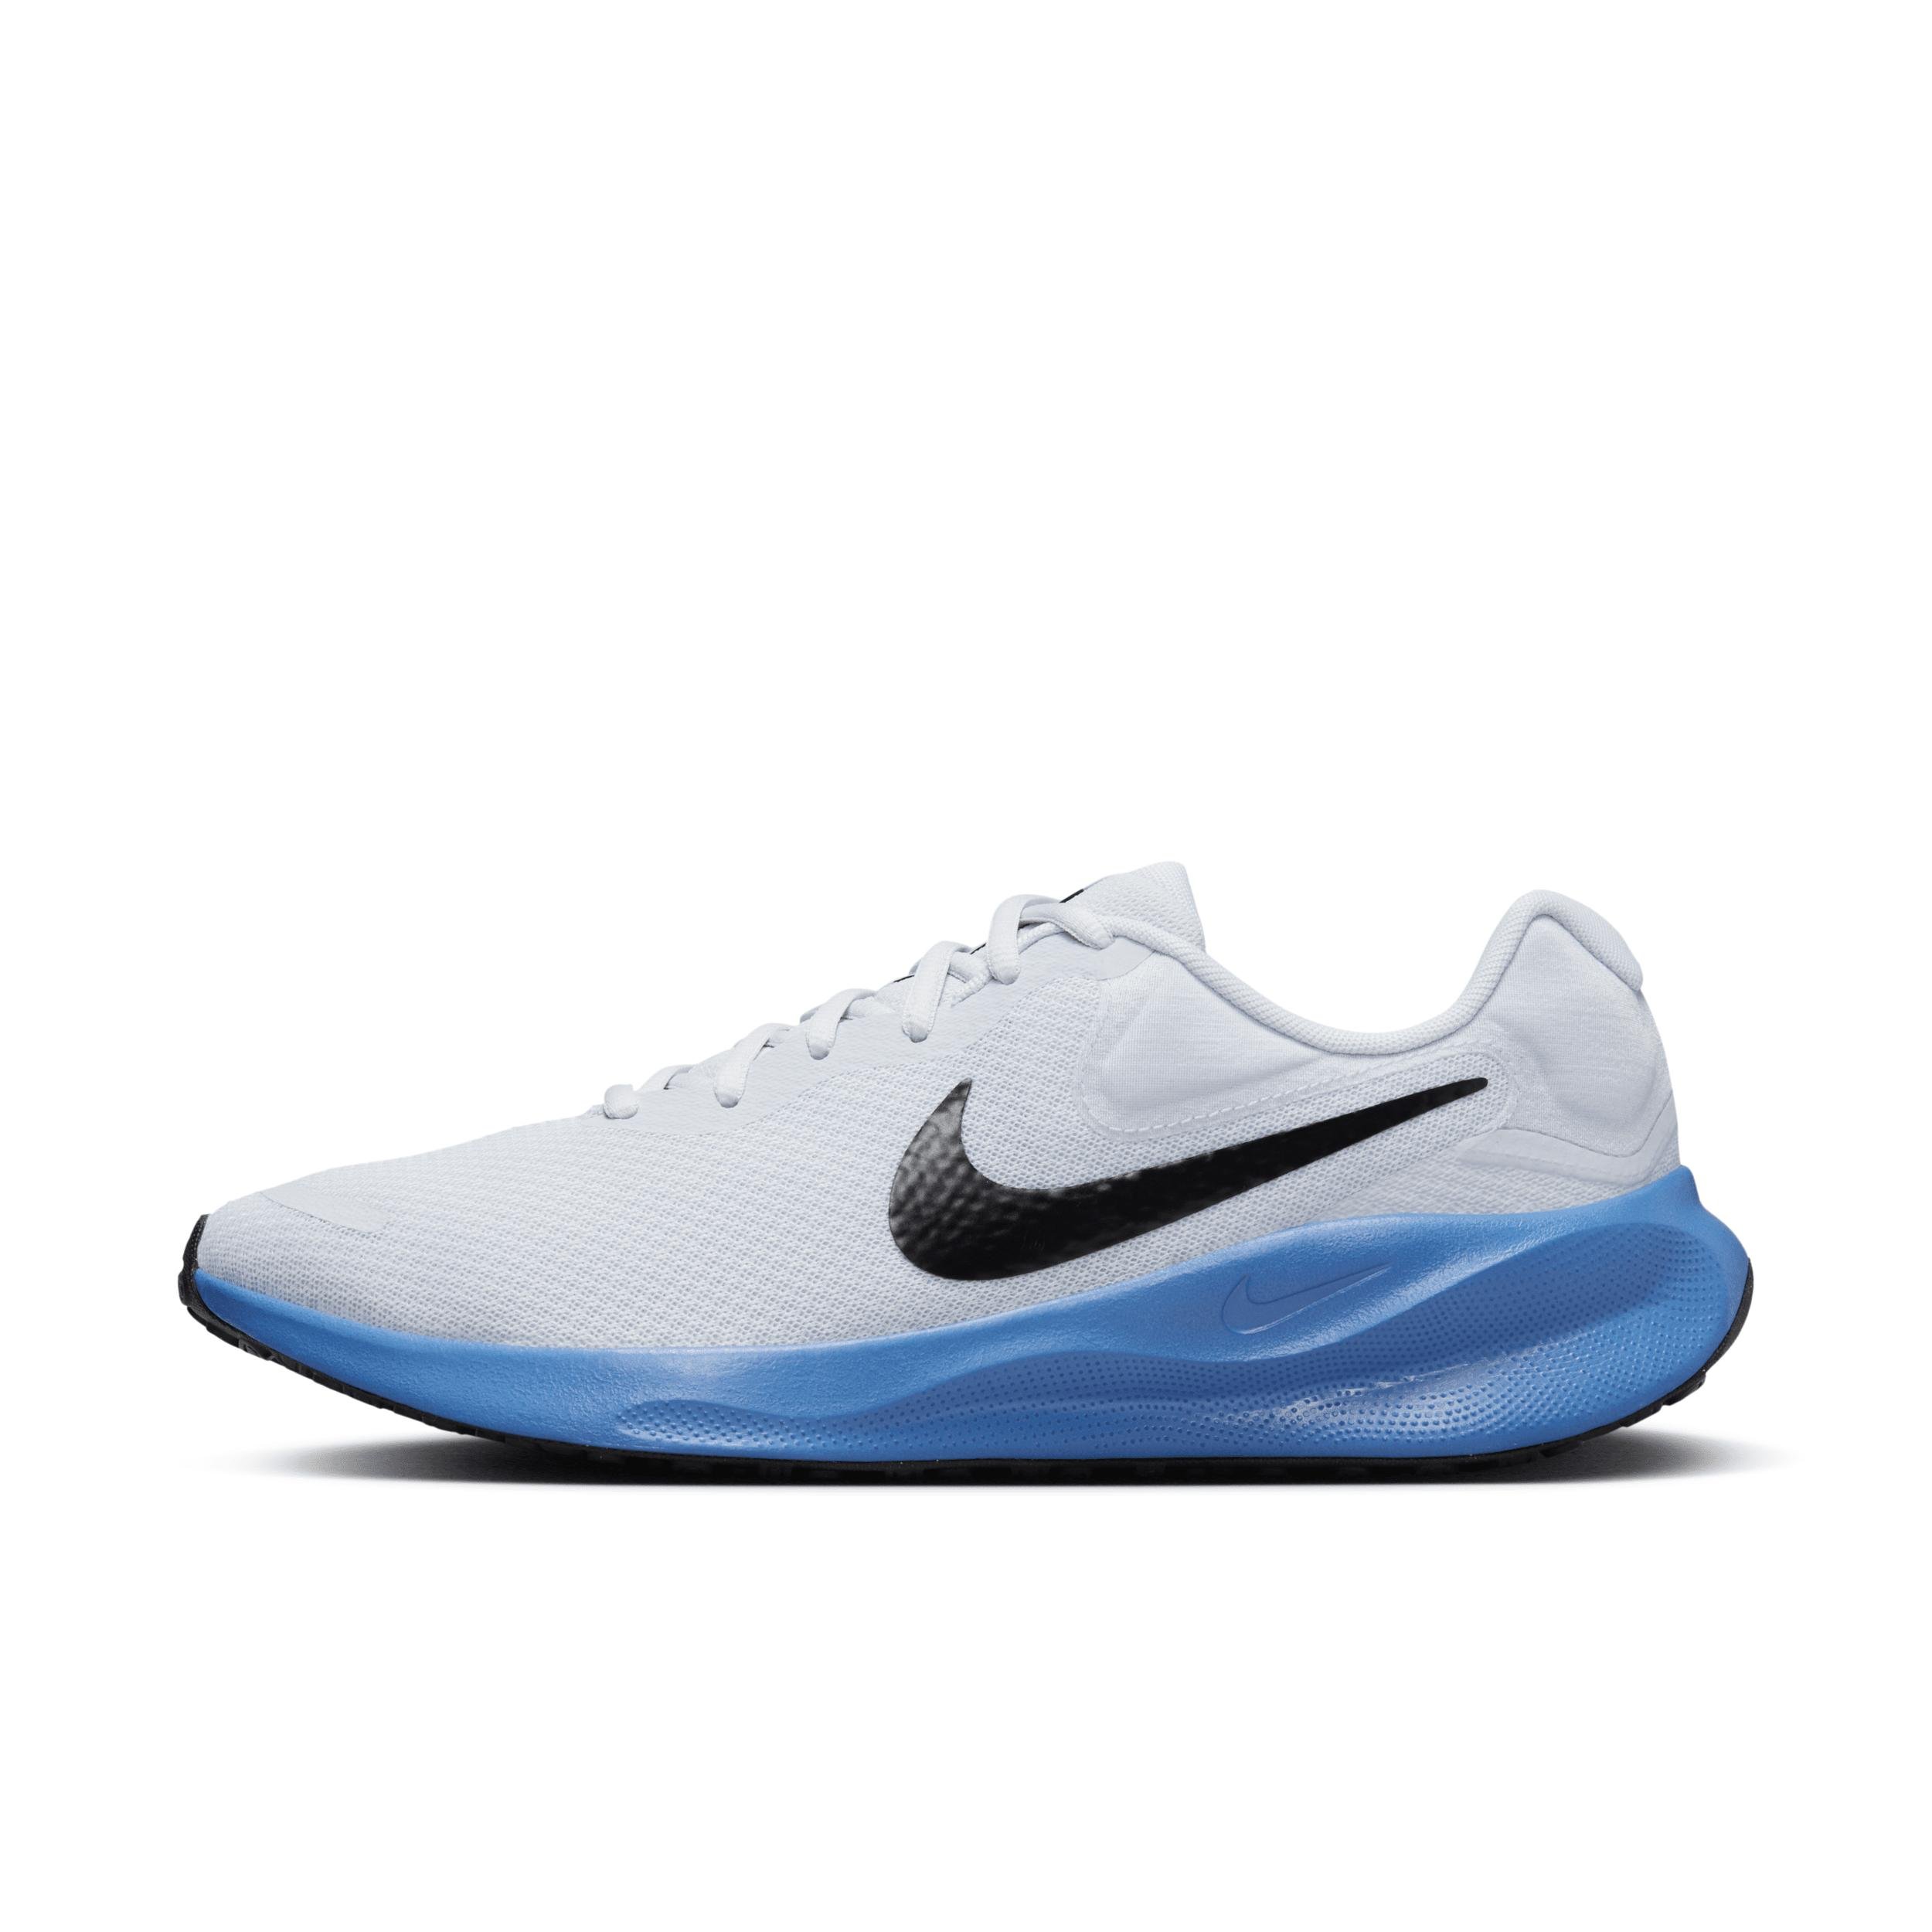 Nike Men's Revolution 7 Road Running Shoes by NIKE